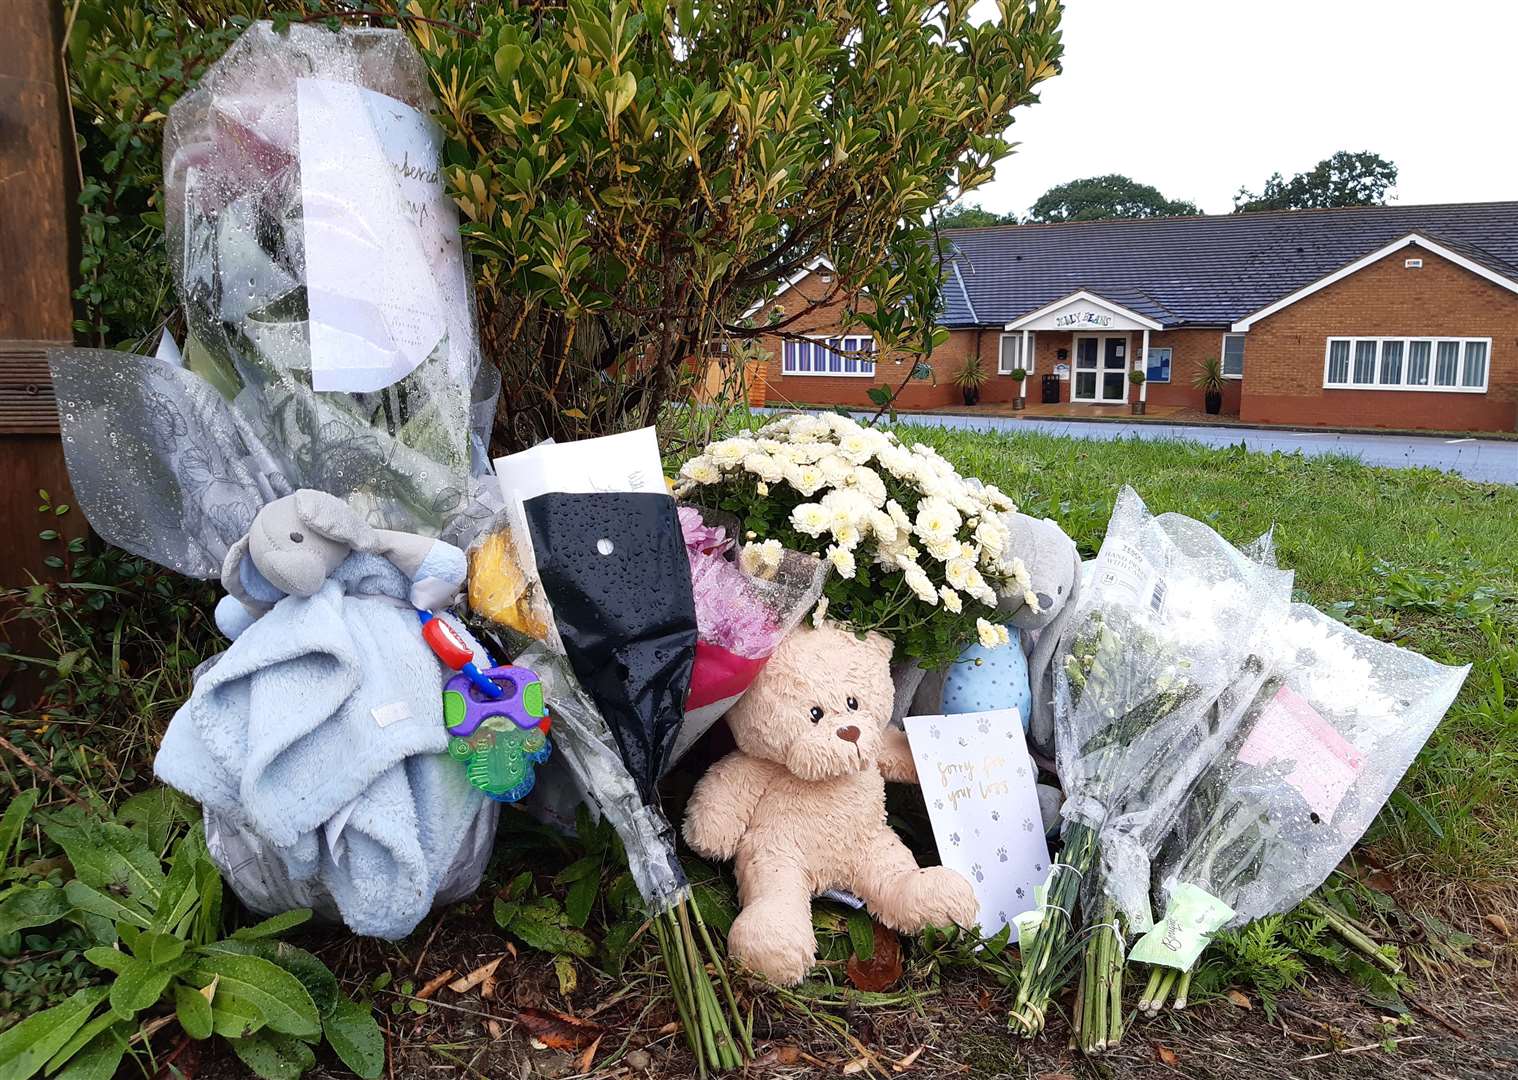 Tributes have been left at Jelly Beans Day Nursery in Ashford